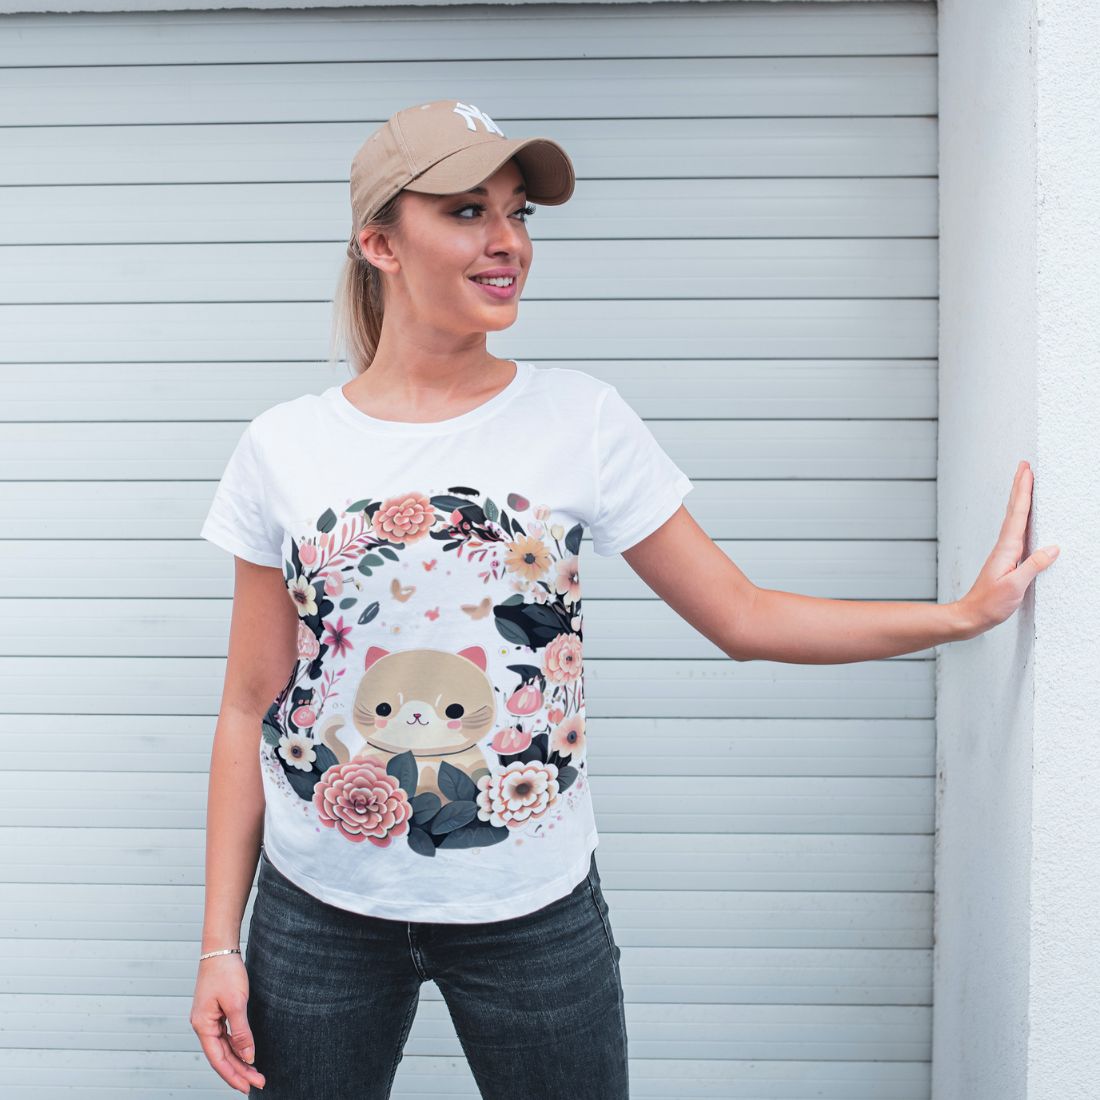 Woman wearing a t - shirt with a bear on it.